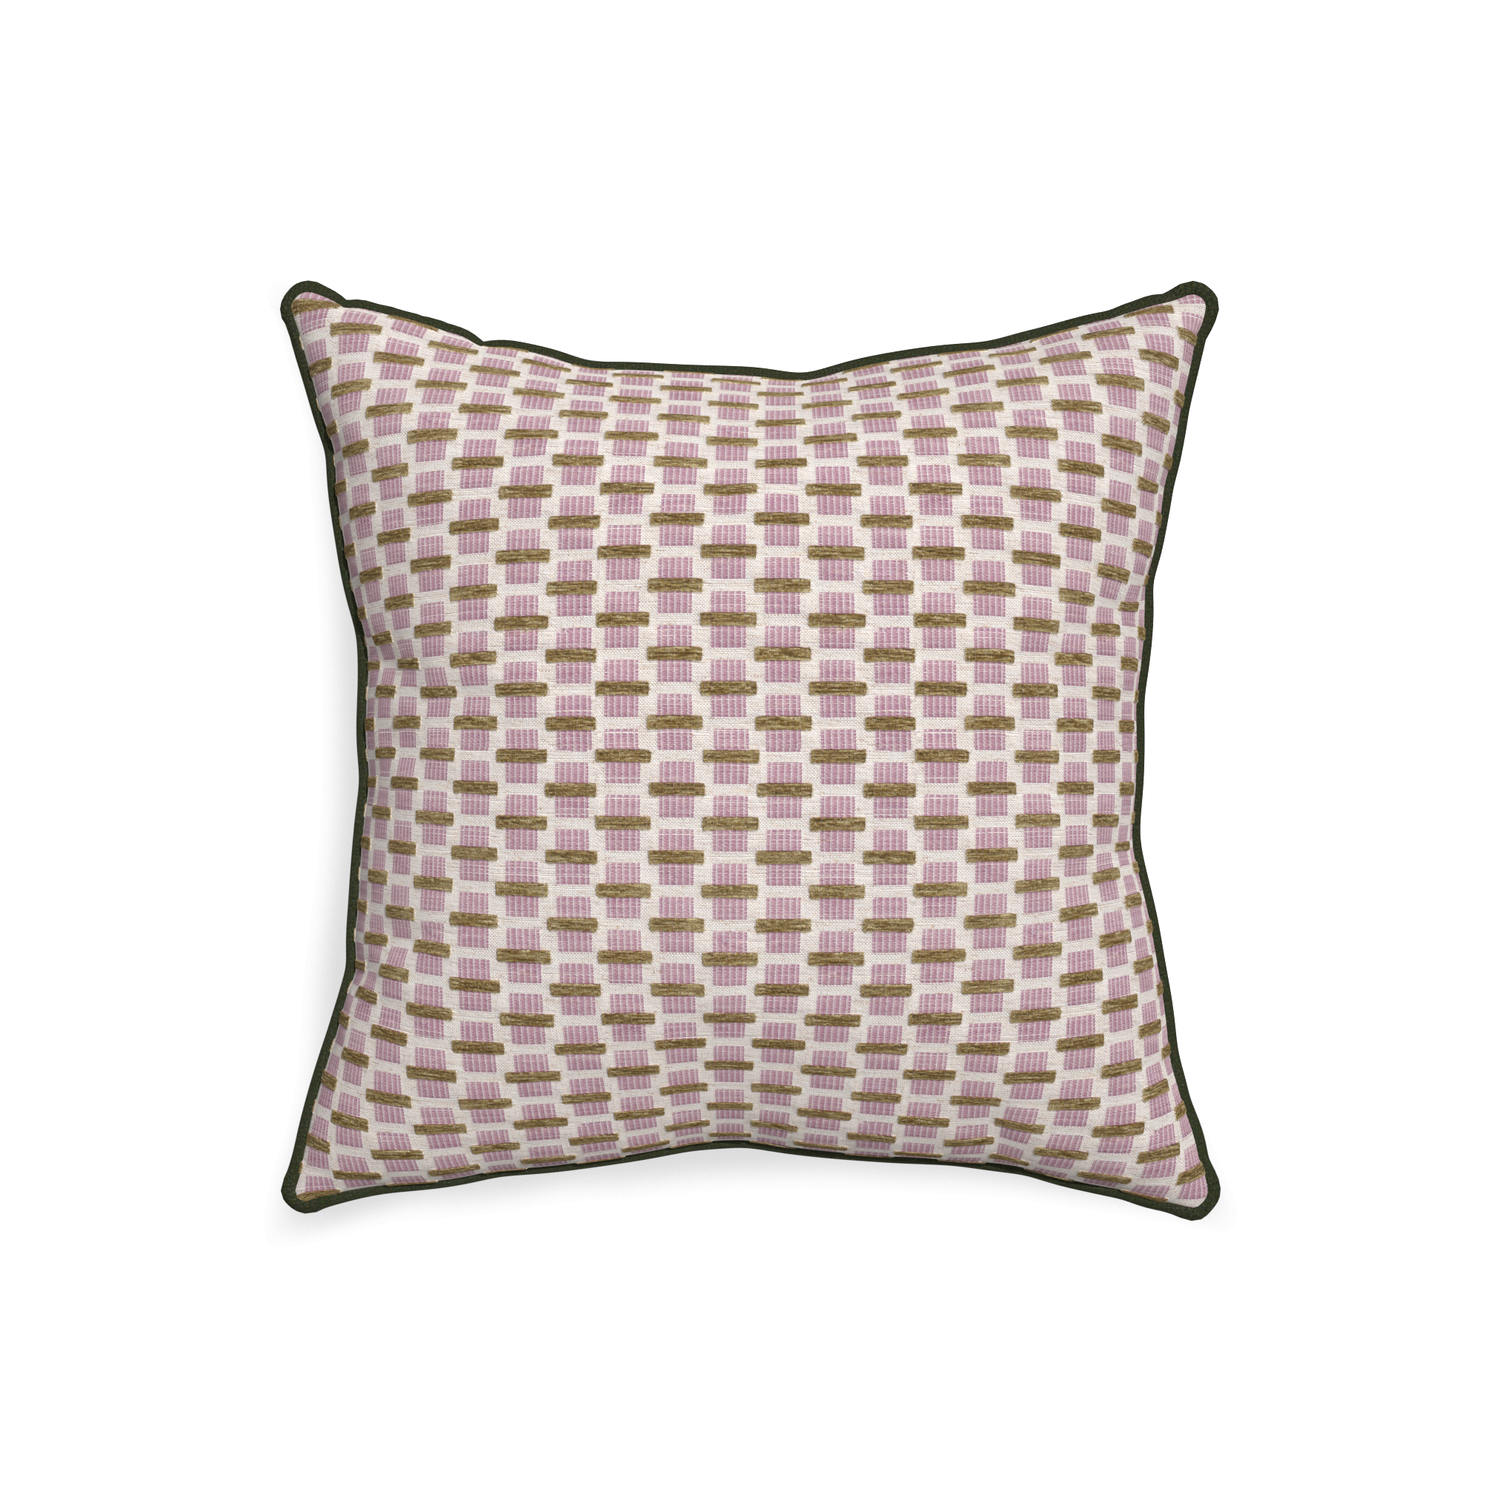 20-square willow orchid custom pink geometric chenillepillow with f piping on white background